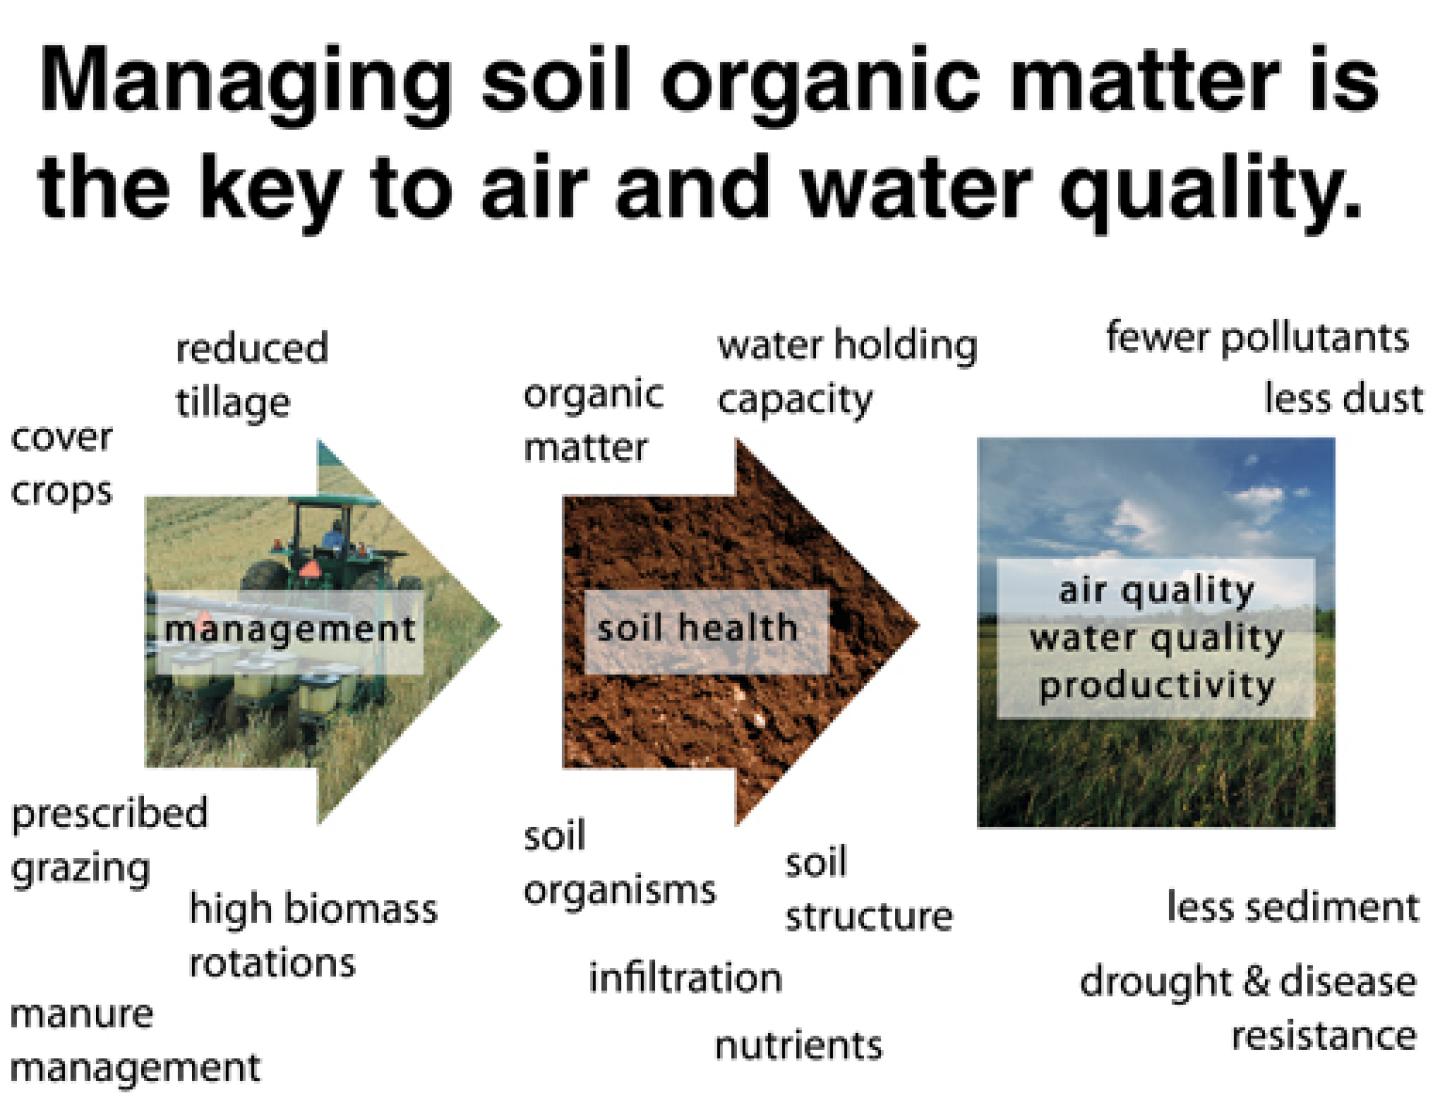 Managing soil organic matter is the key to air and water quality